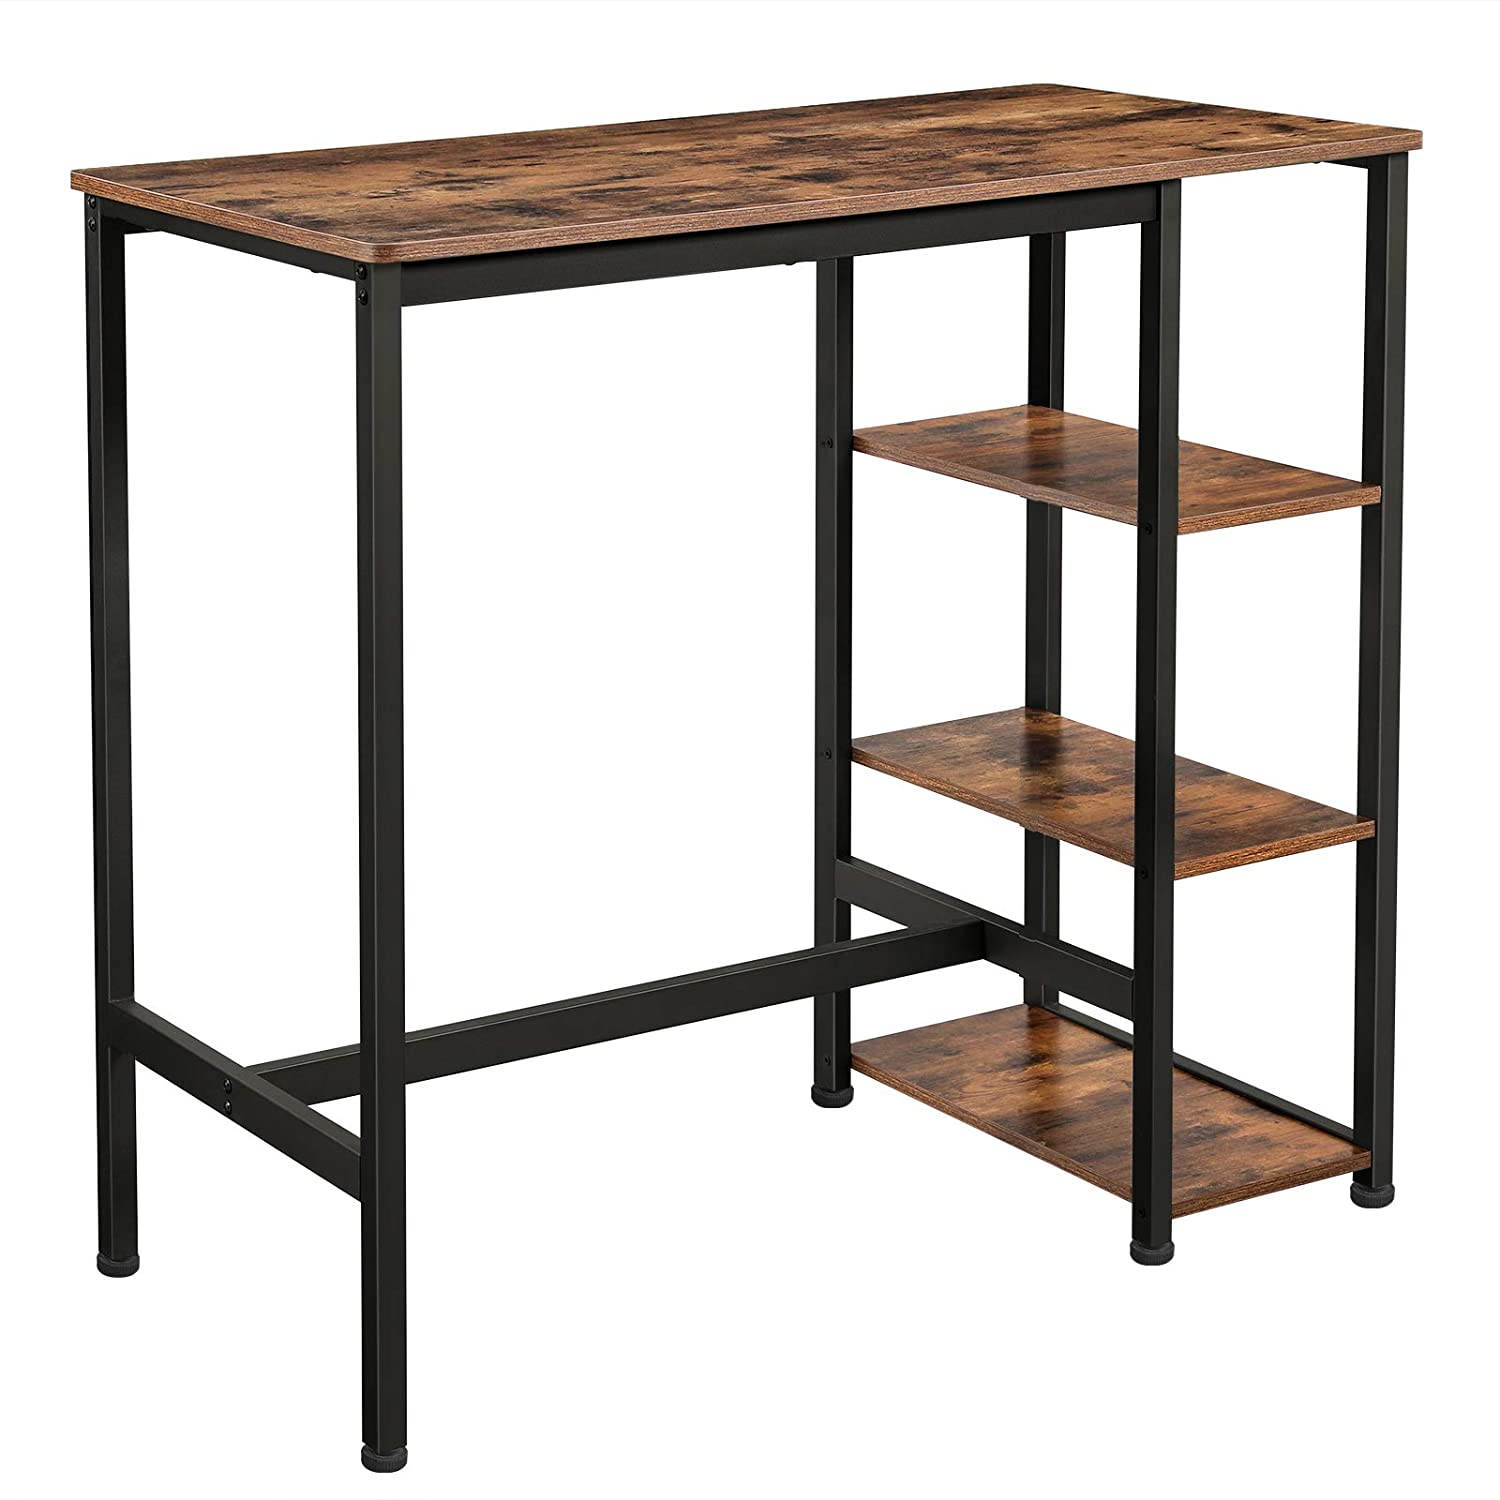 Bar Table, Kitchen Table, Dining Table with 3 Shelves, Stable Iron Structure, for Bar Party Cellar, Restaurant, 109 x 60 x 100 cm, Industrial Style, Easy to Assemble, Rustic Brown LBT11X RAW58.dk 